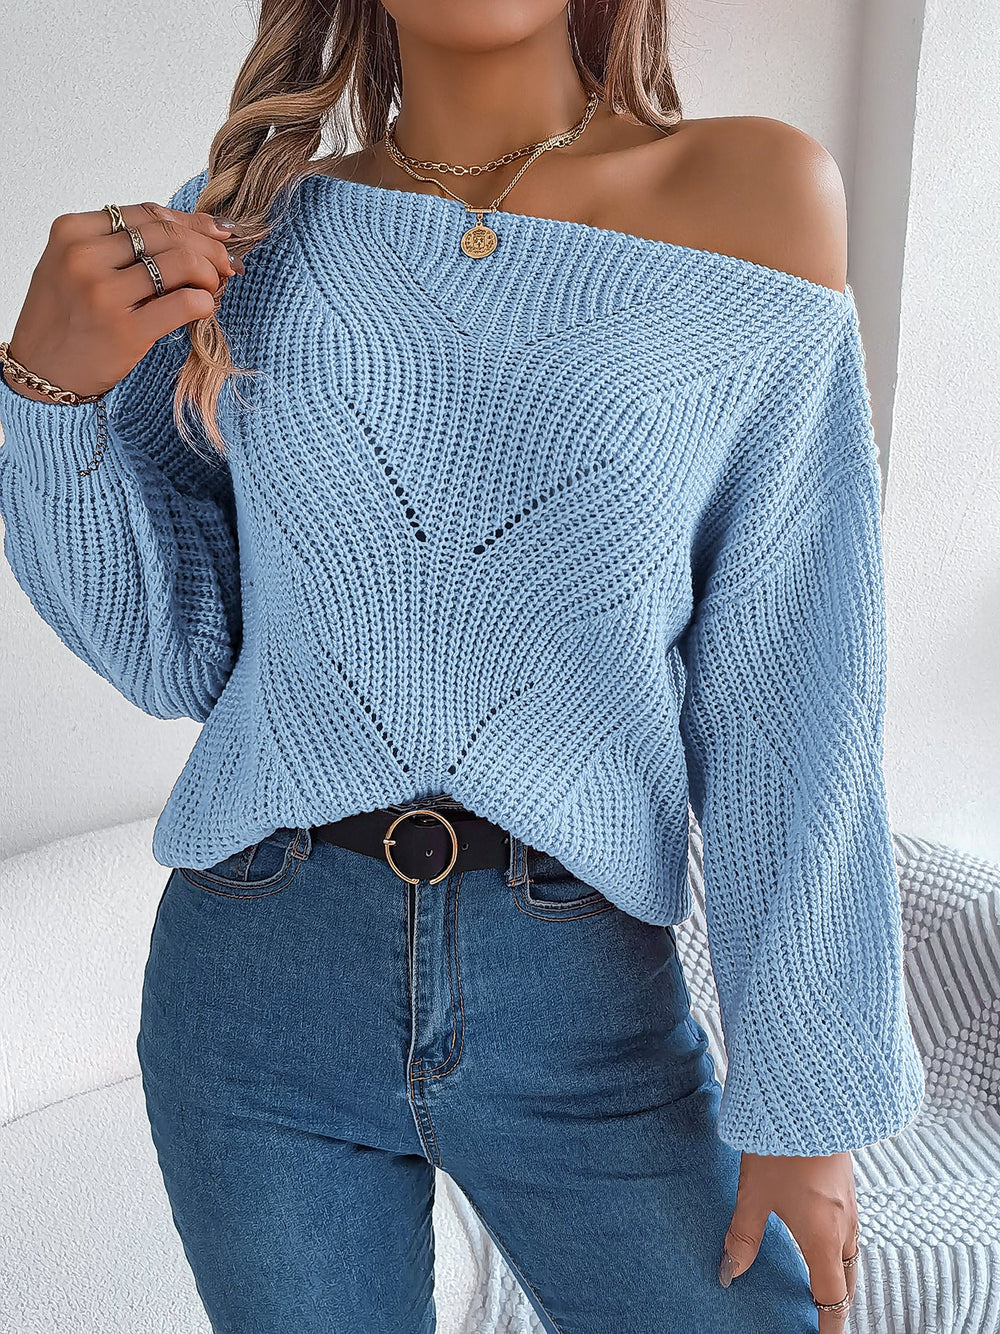 Autumn Winter Casual Hollow Out Cutout out off Neck off the Shoulder Lantern Sleeve Sweater Women Clothing